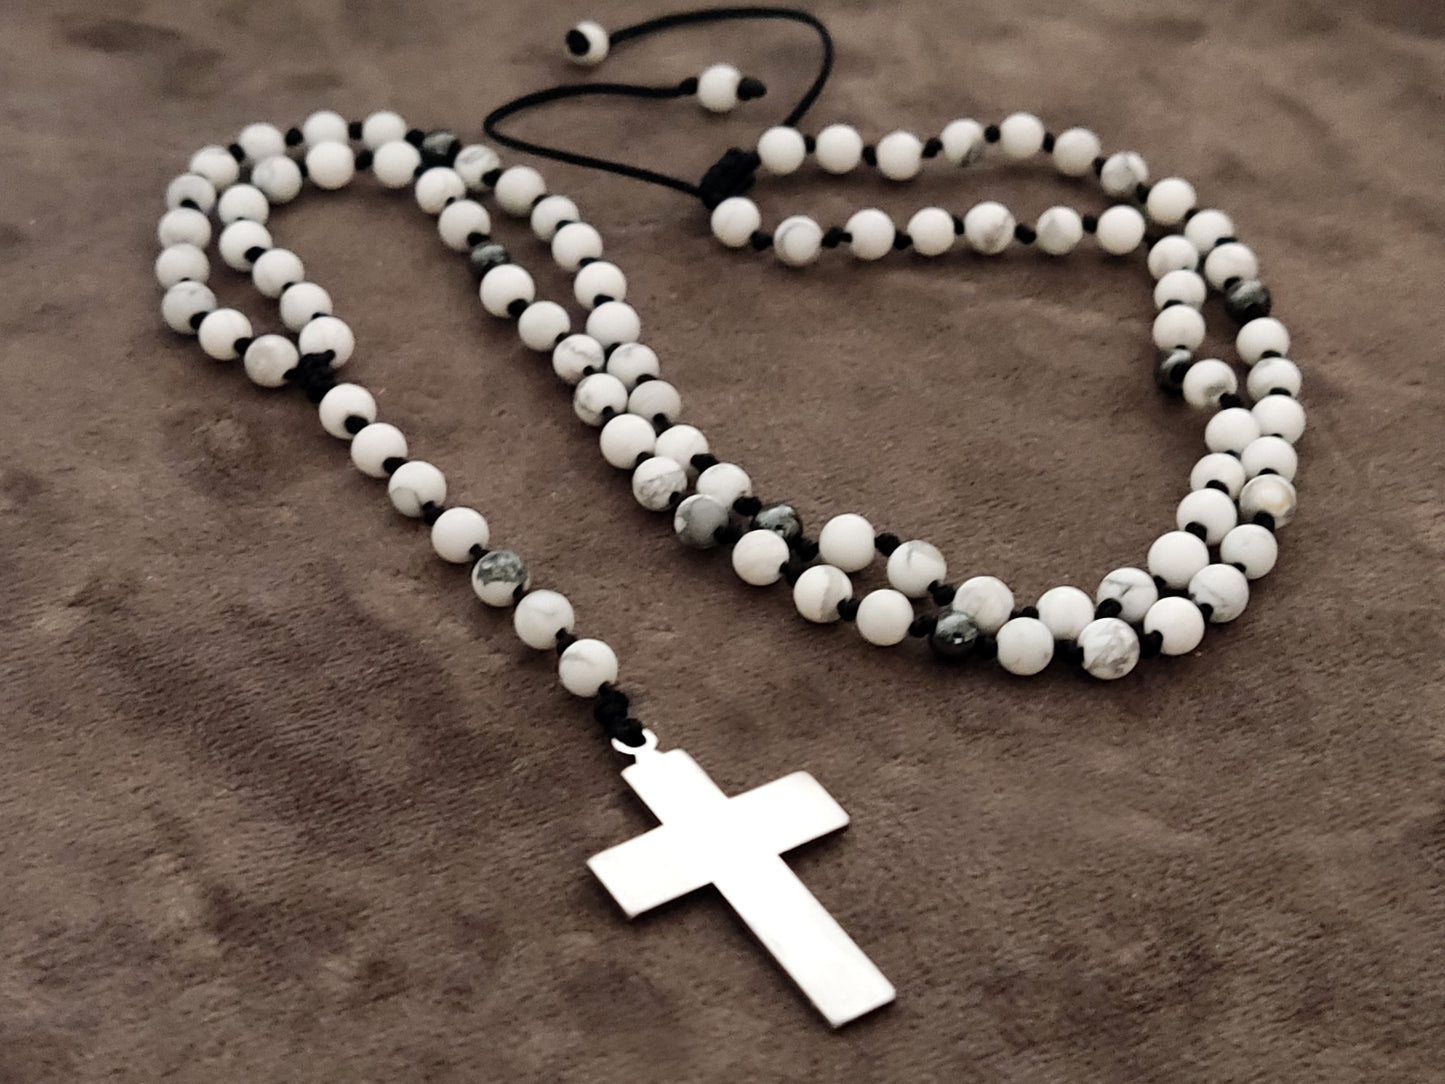 Discover Greek craftsmanship: Handmade Rosary Necklace with Natural White Howlite & Hematite Stones (4mm). Stainless Steel Cross (25 x 20 mm). Adjustable 55 - 70 cm length. Free Shipping.